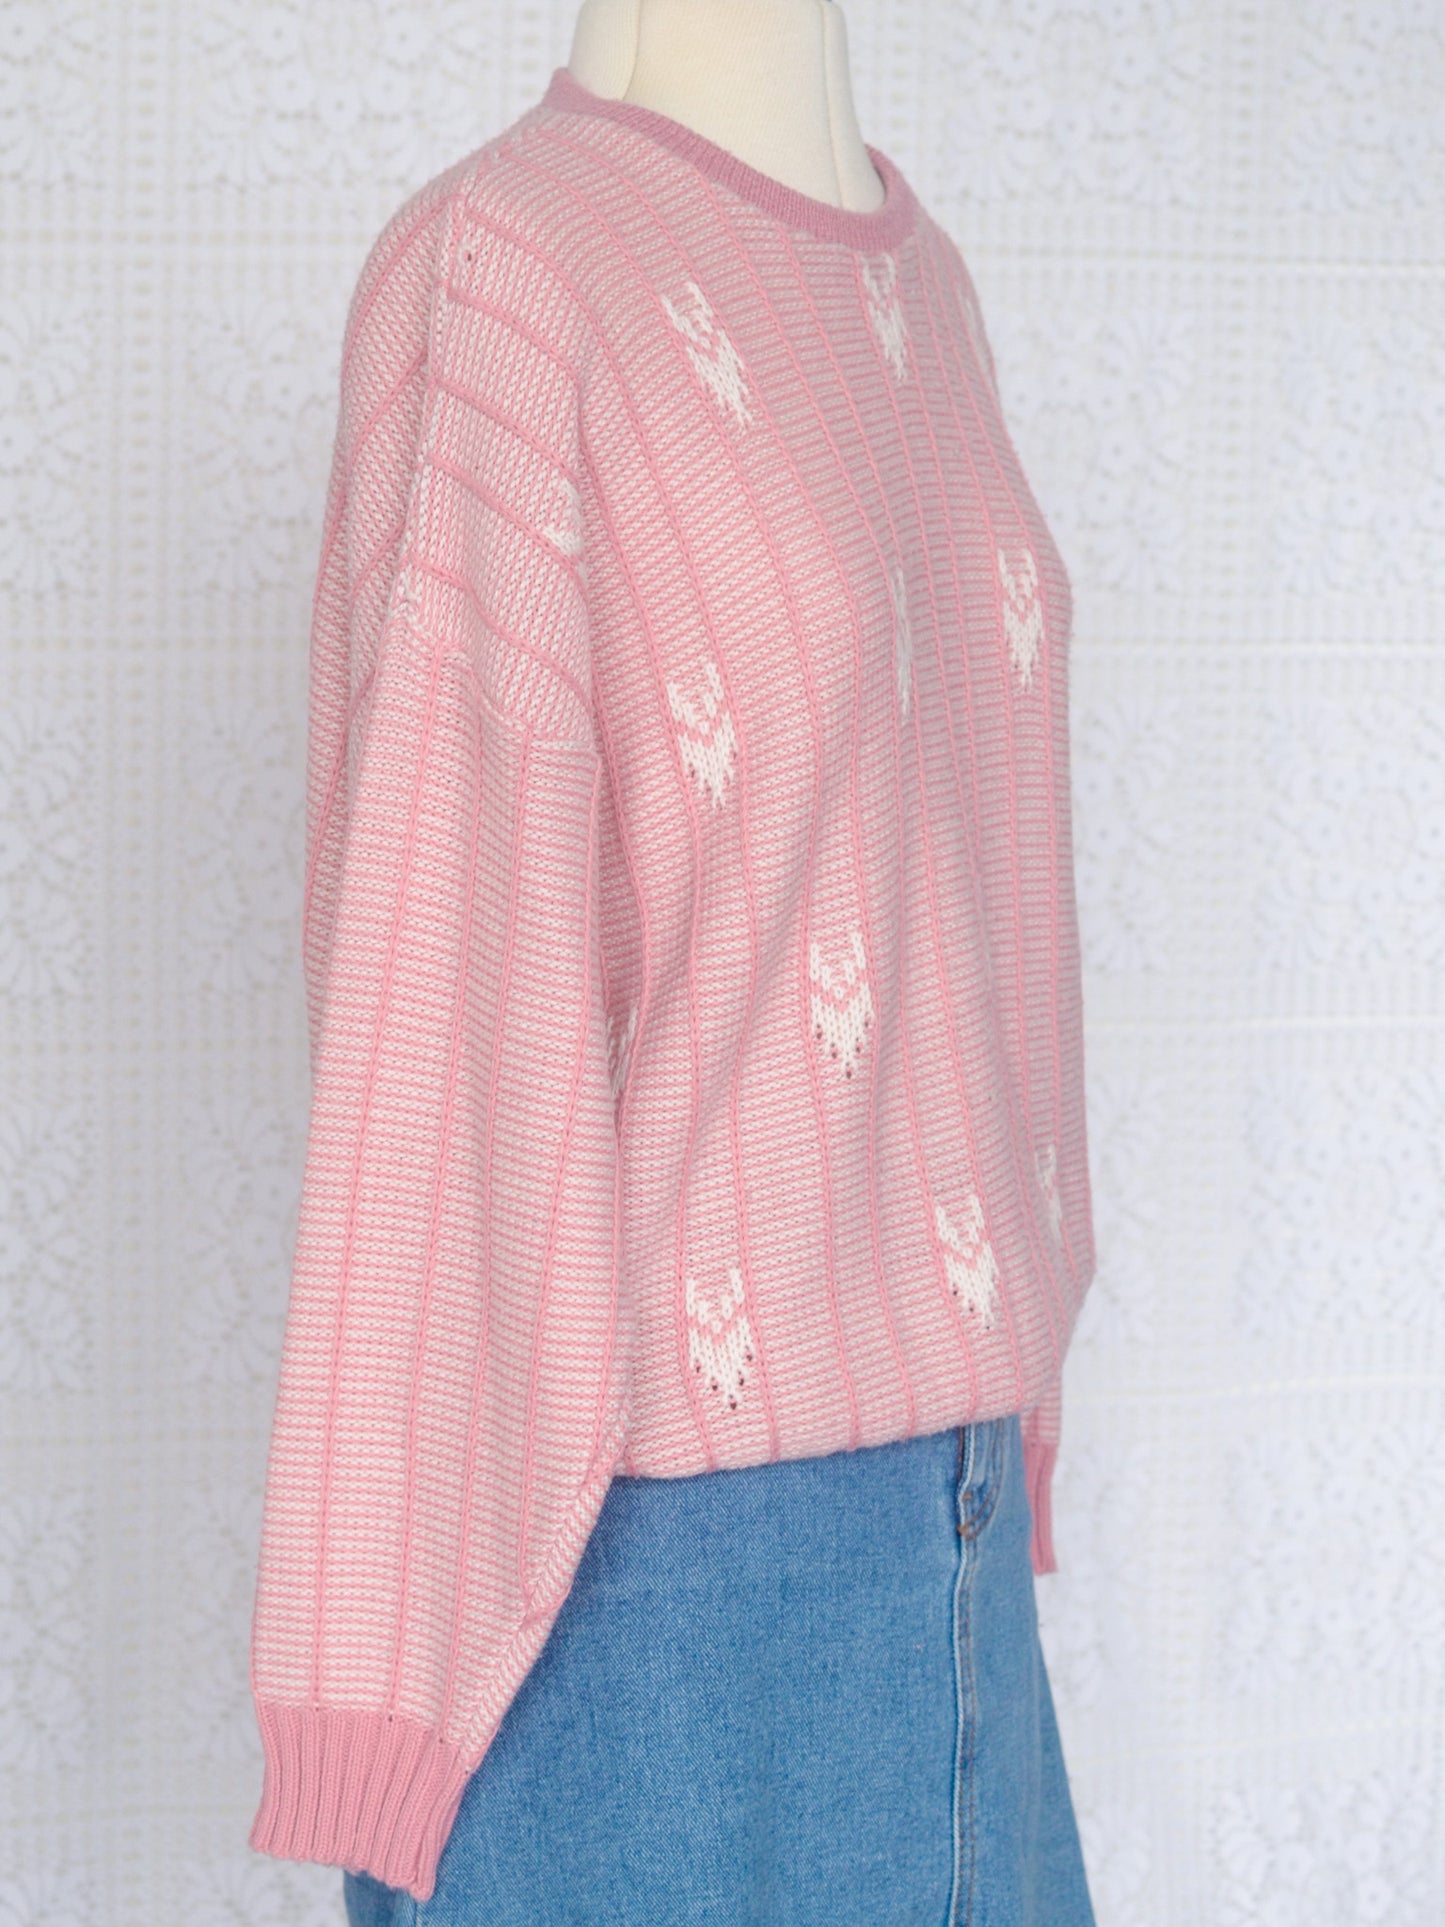 1970s style pink and white ribbed long sleeve knitted jumper